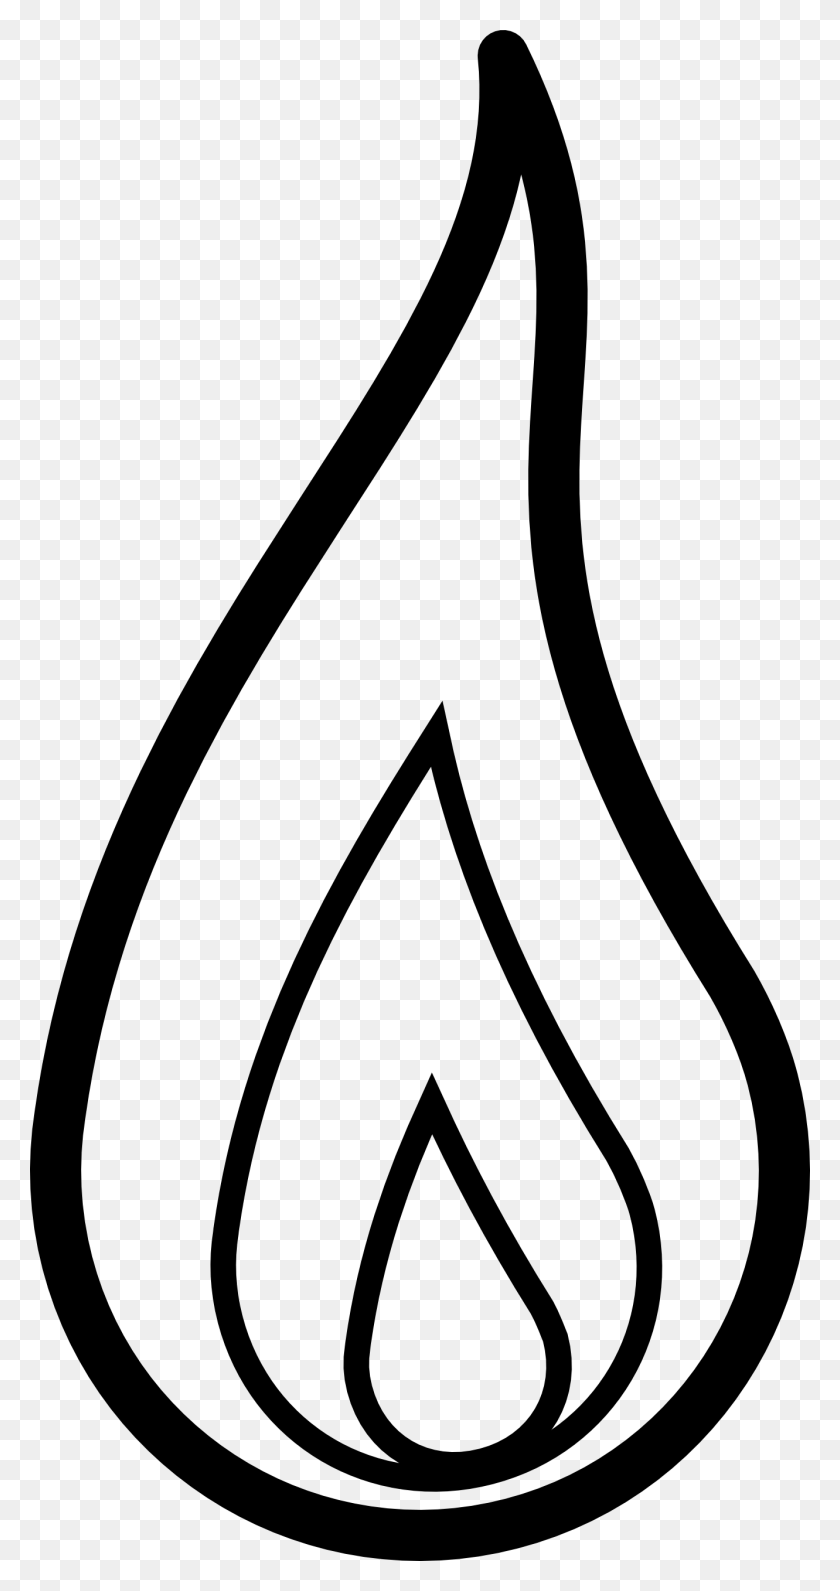 1331x2613 Comet Clipart Single Flame - Comet Clipart Black And White